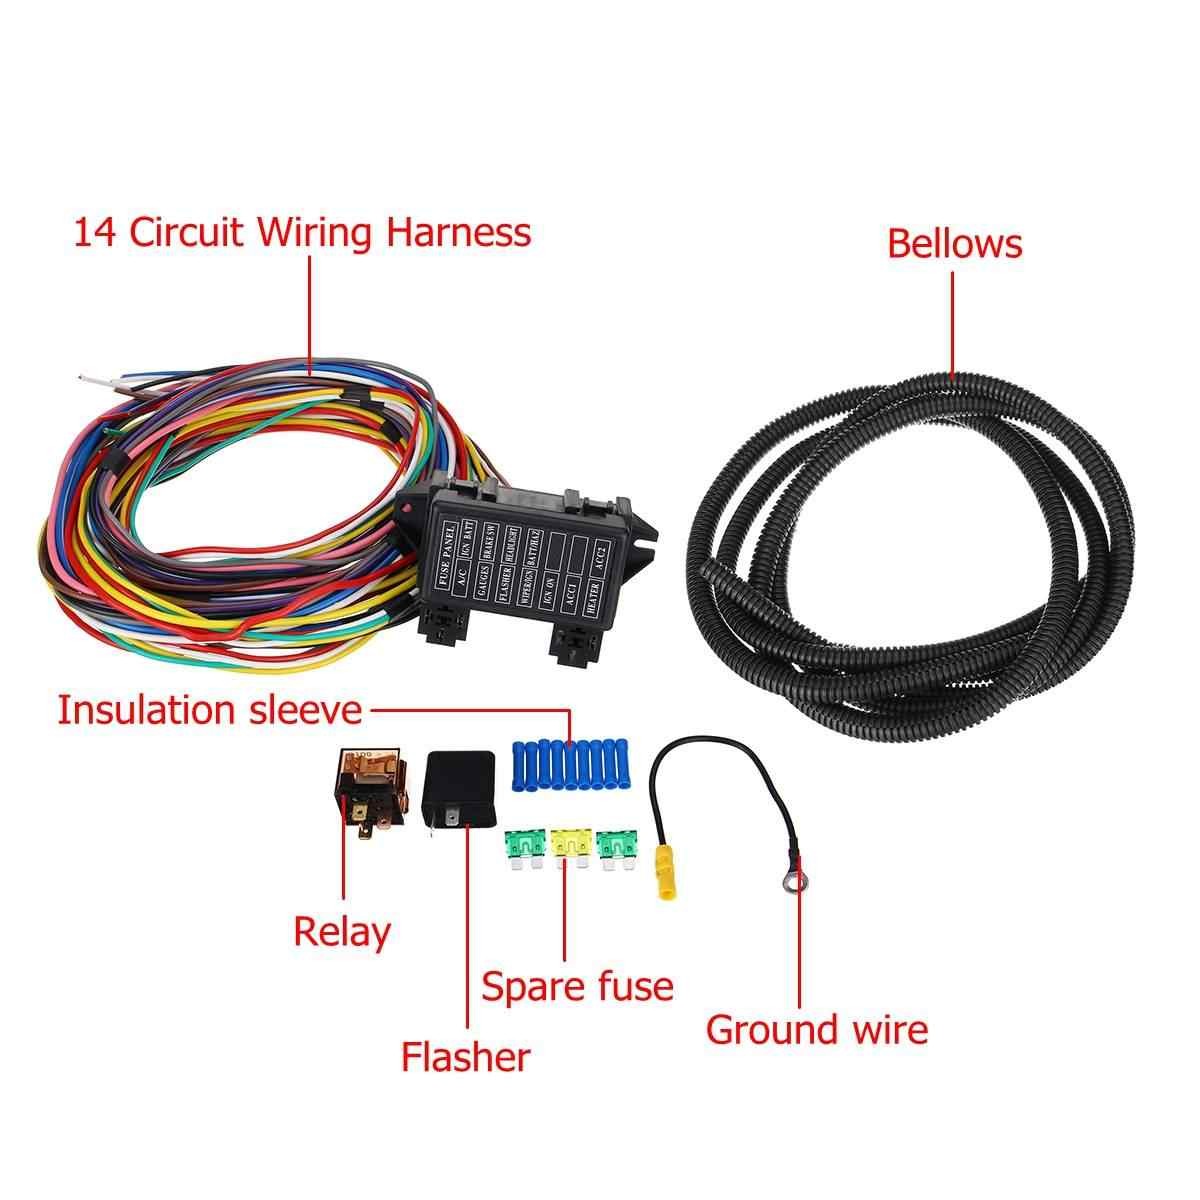 12 14 Circuit Universal Wiring Harness 14 Fuse 12V Muscle Car Hot R od Street R q50